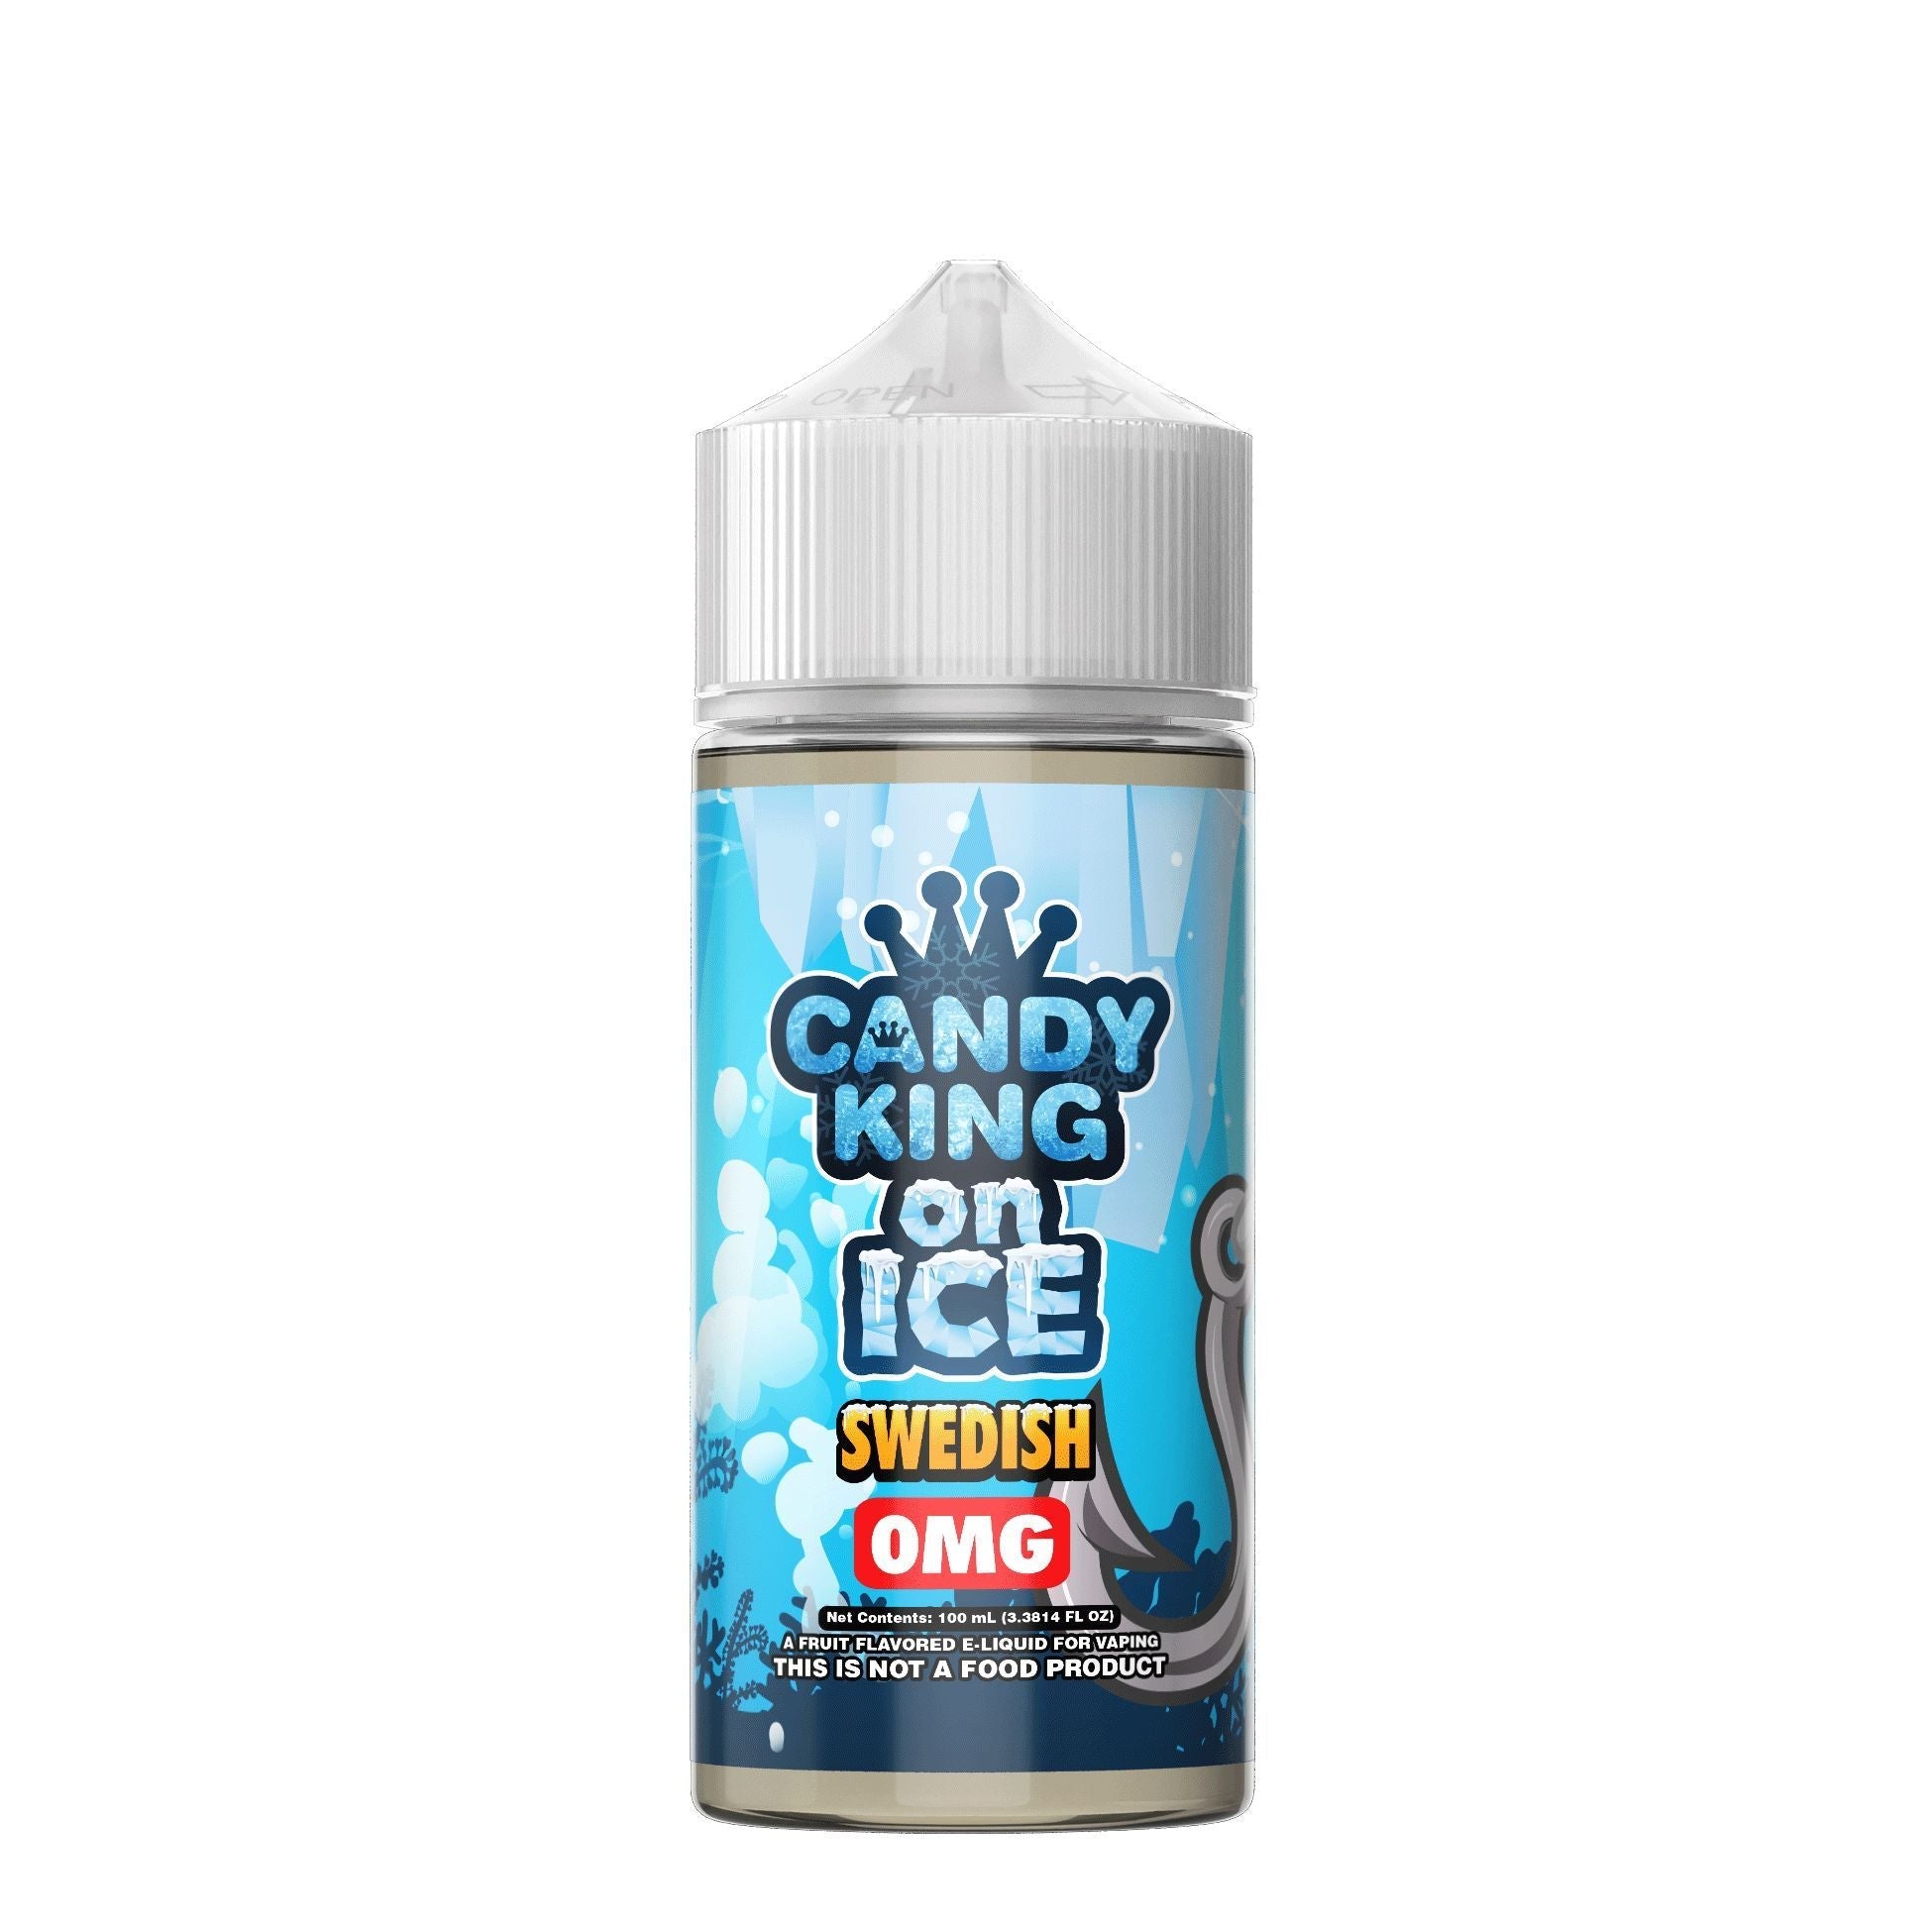 Buy Swedish On Ice By Candy King - Wick And Wire Co Melbourne Vape Shop, Victoria Australia